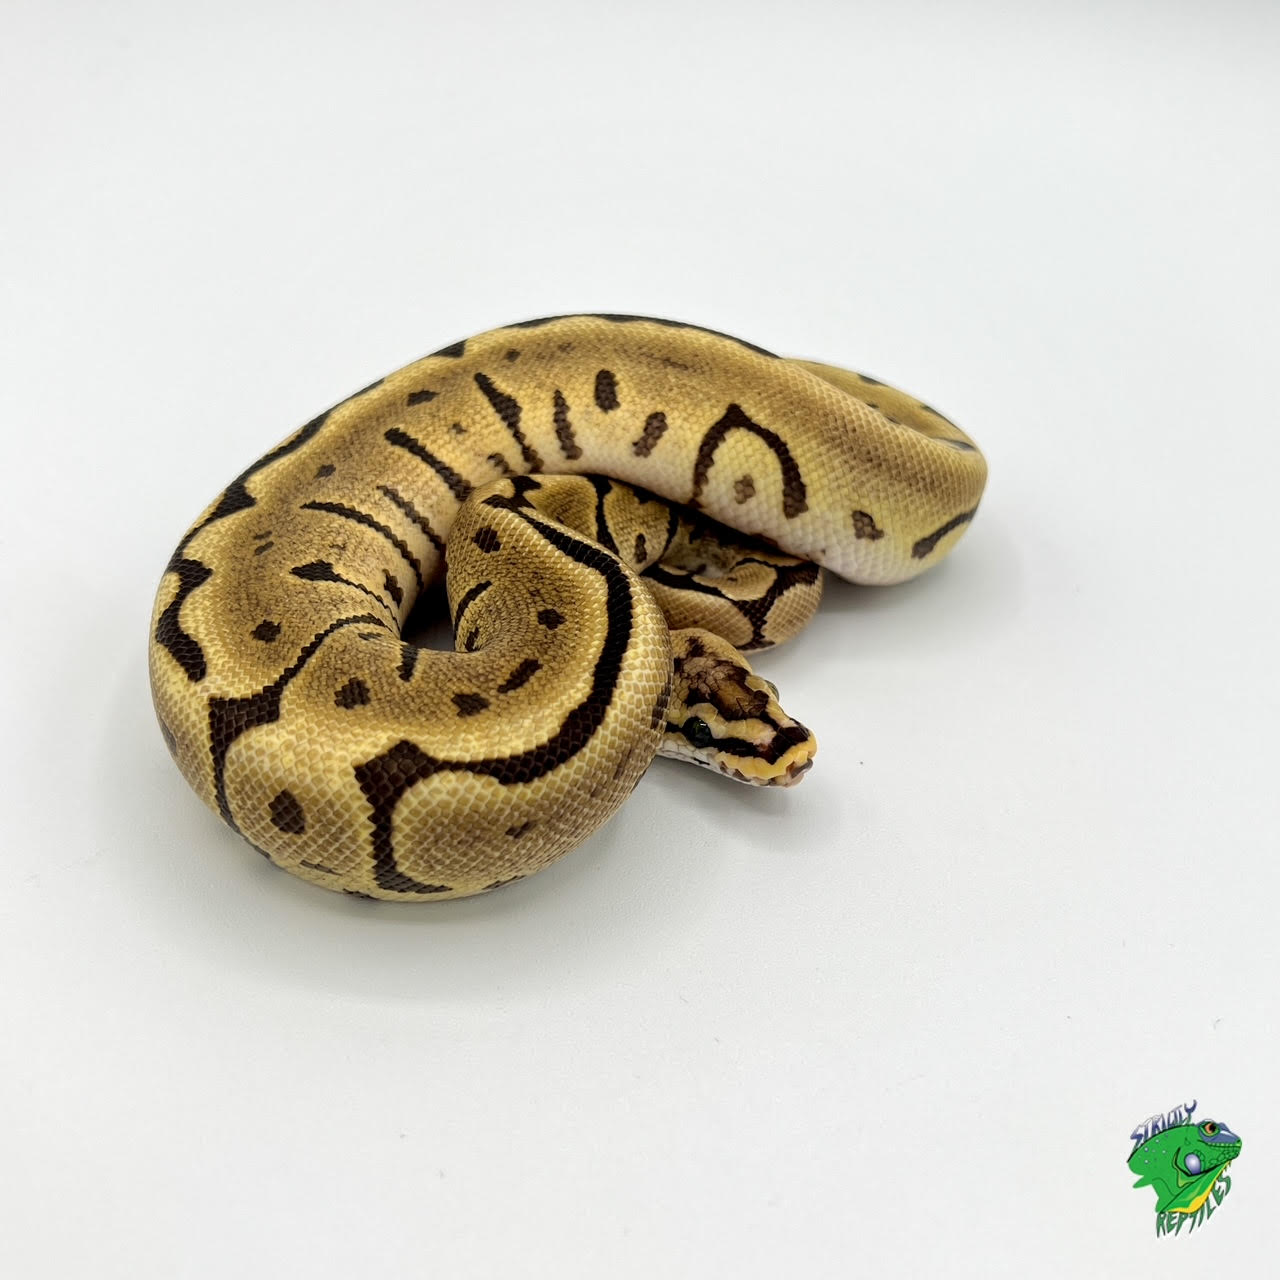 Leopard Spider Fire Ball Python - Big Baby - Strictly Reptiles Inc.